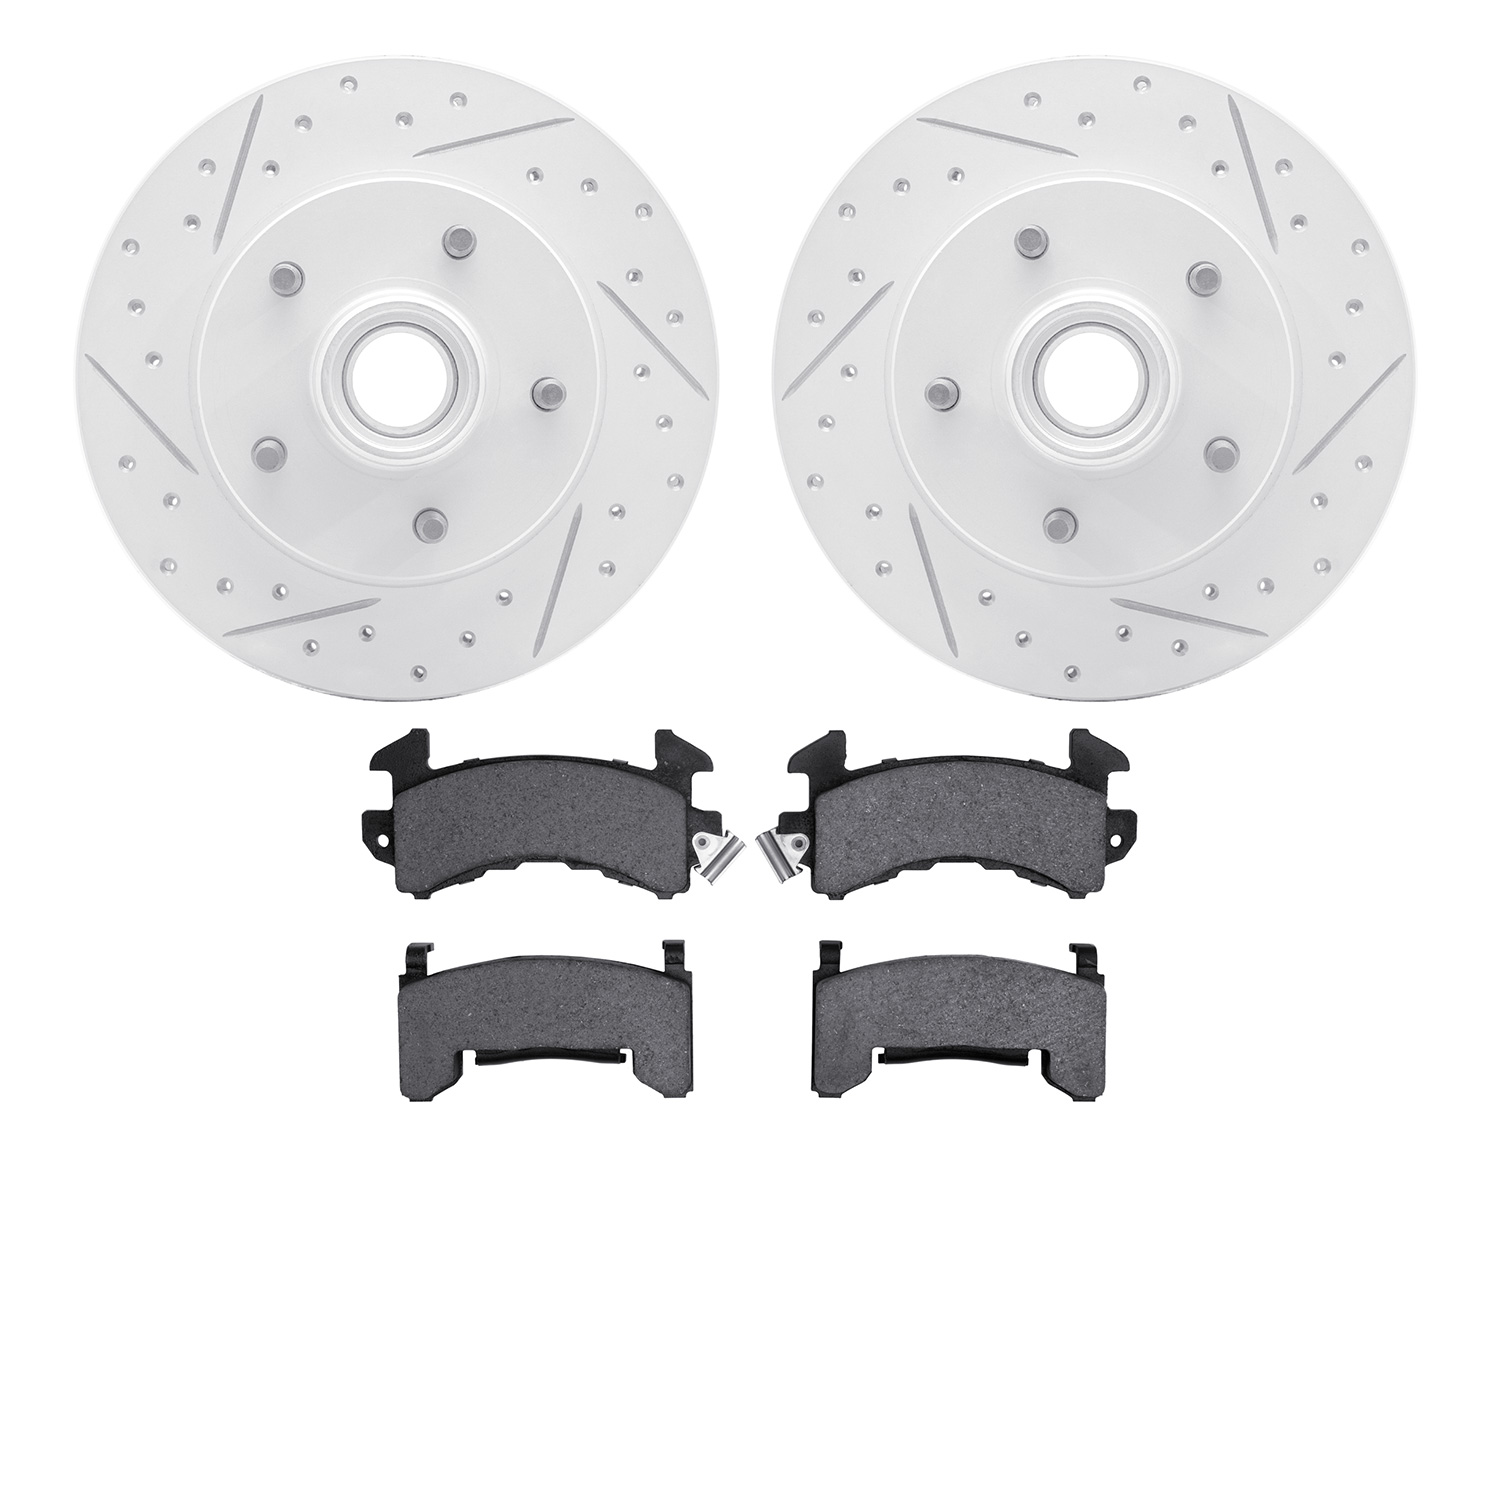 2402-47005 Geoperformance Drilled/Slotted Brake Rotors with Ultimate-Duty Brake Pads Kit, 1982-1995 GM, Position: Front